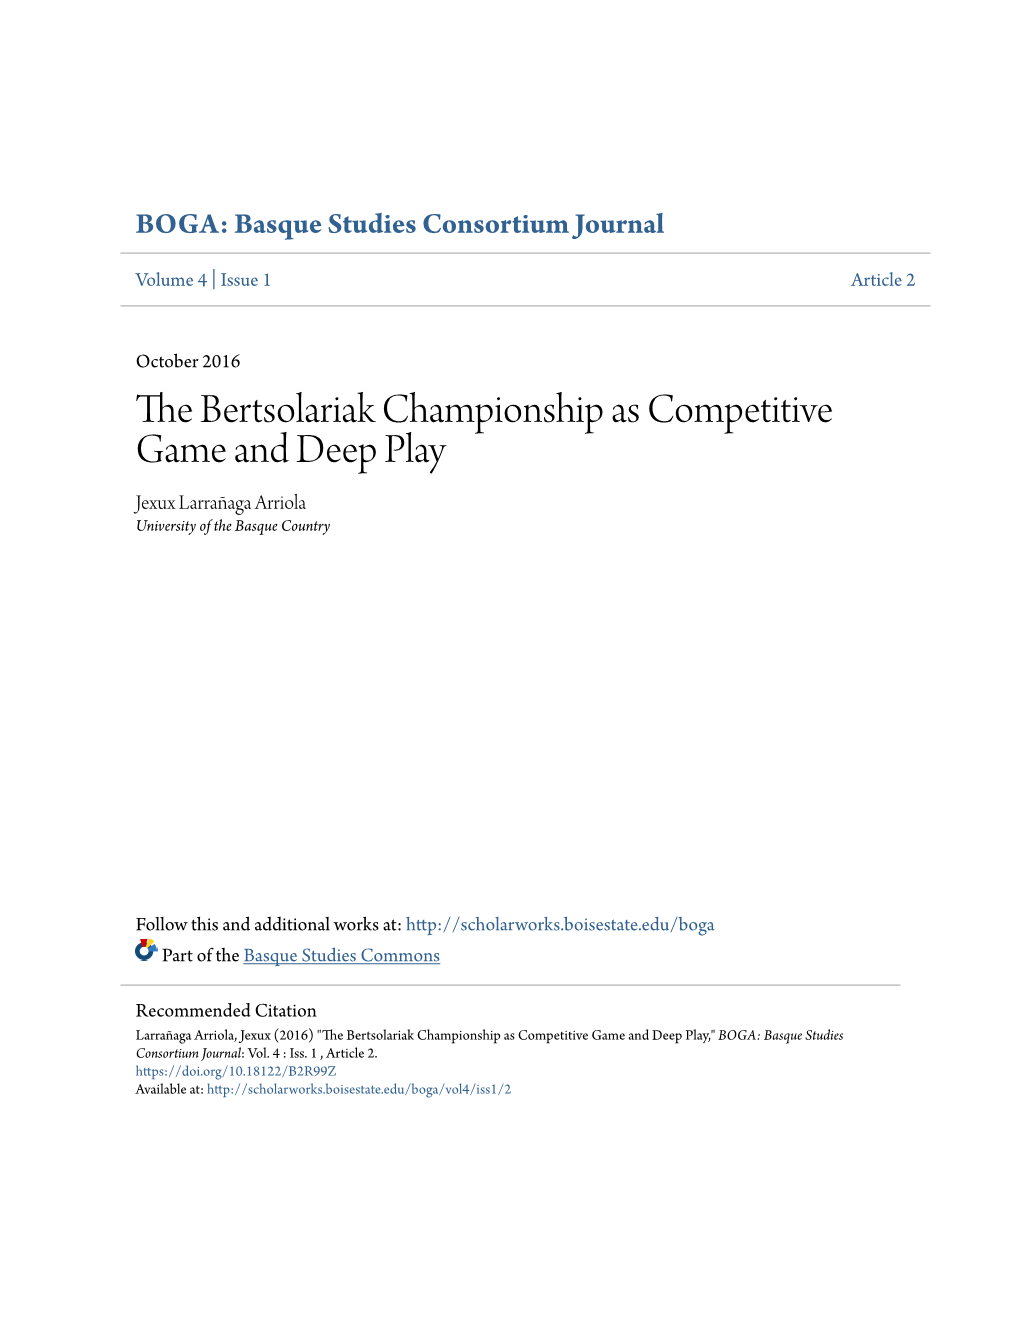 The Bertsolariak Championship As Competitive Game and Deep Play Jexux Larrañaga Arriola University of the Basque Country